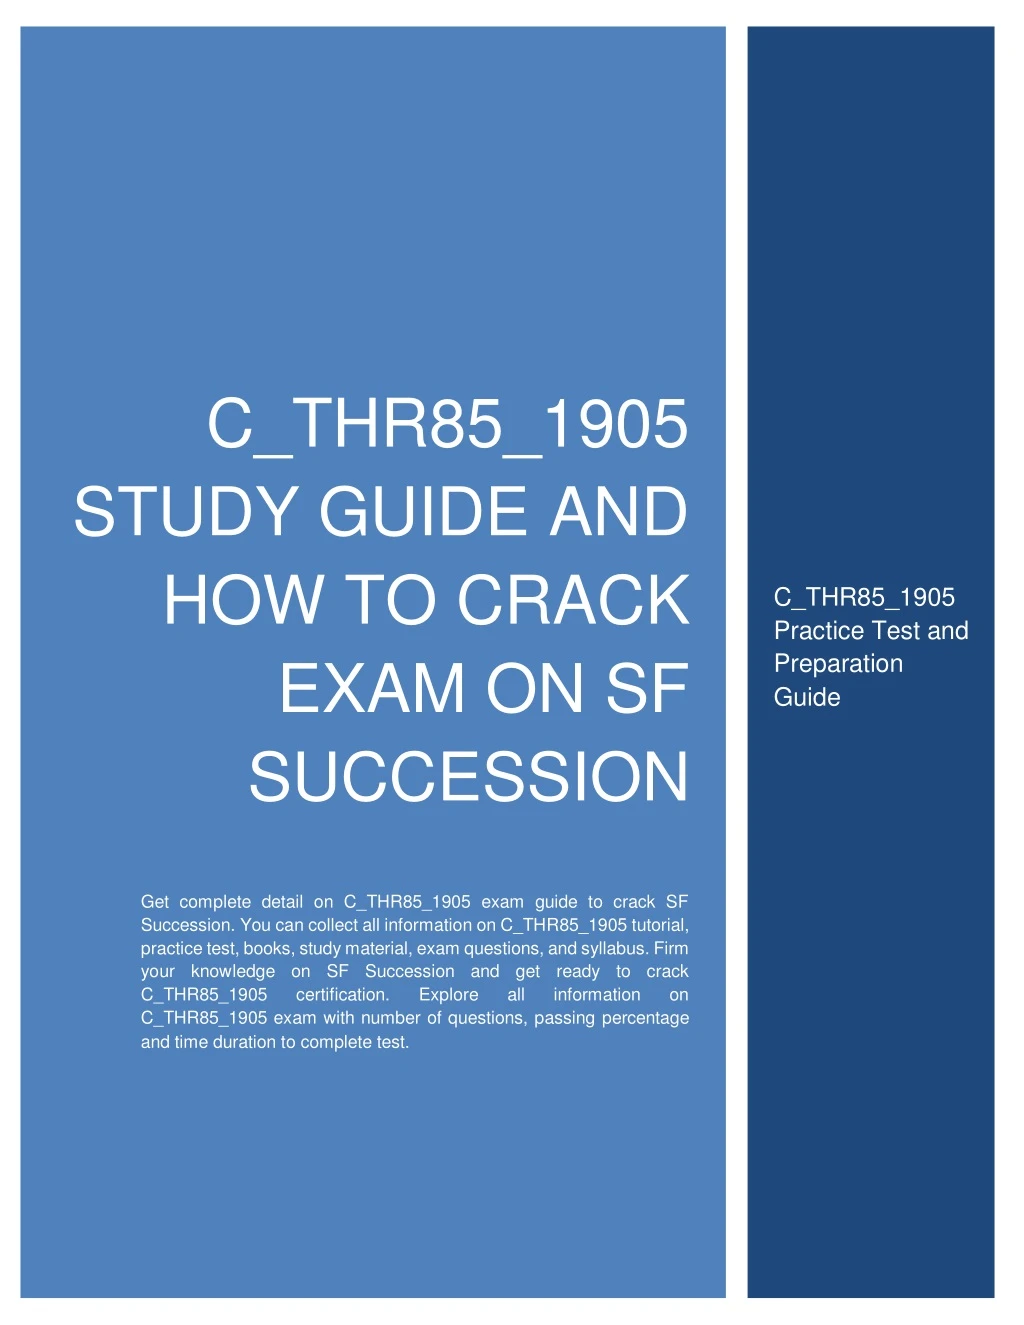 c thr85 1905 study guide and how to crack exam